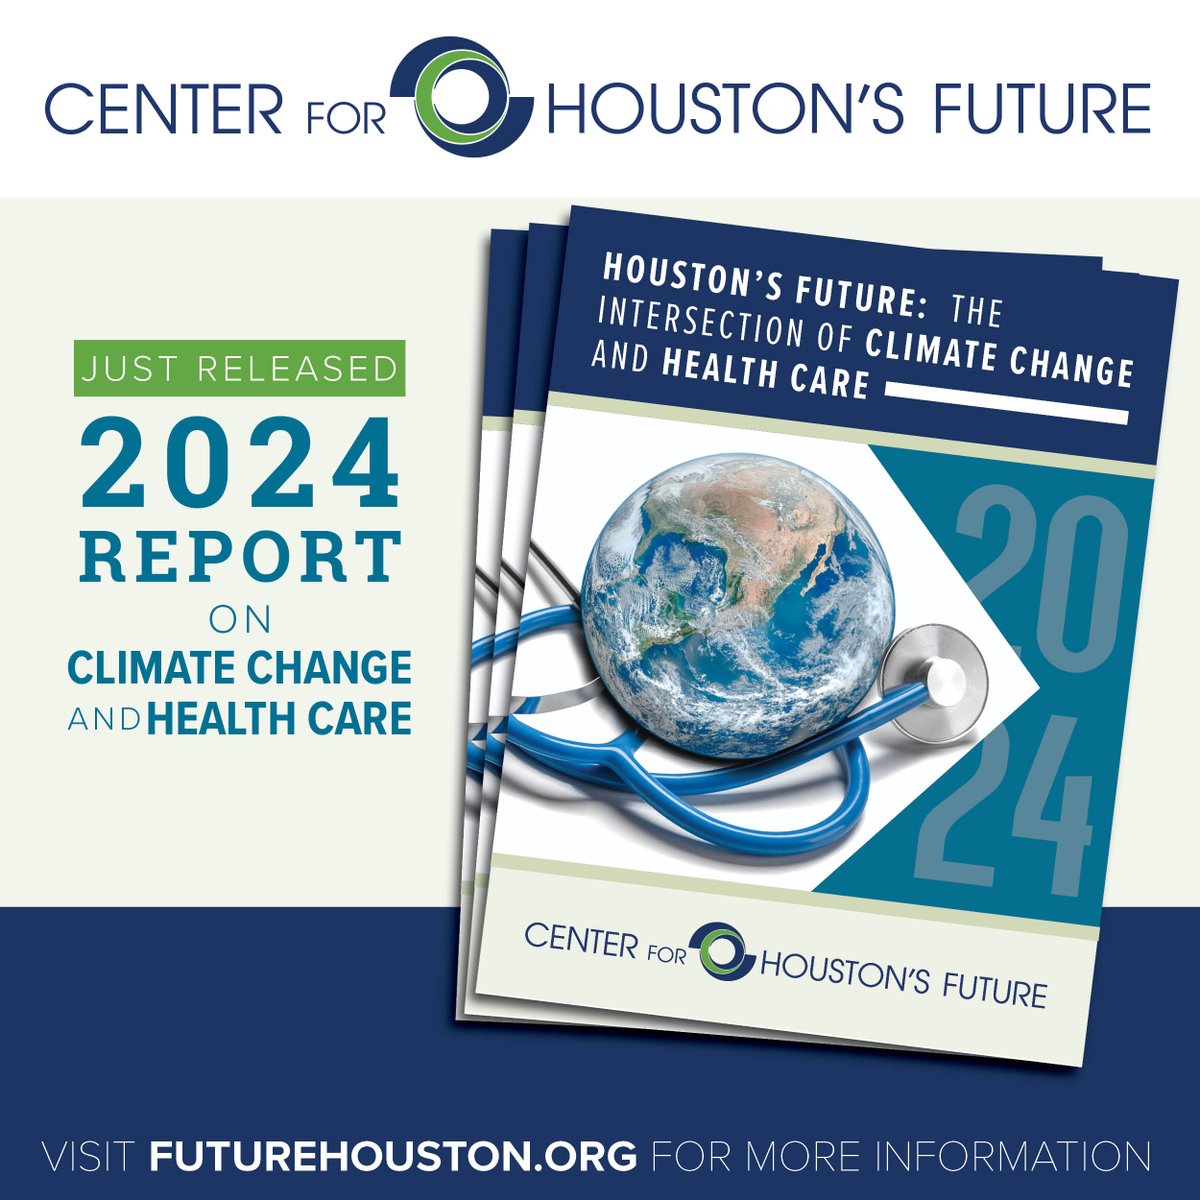 Today we released 'Houston’s Future: The Intersection of Climate Change and Health Care,' a report highlighting escalating health threats our region faces due to climate change. This report was made possible with funding from @StLukesHealthTX. futurehouston.org/climateandheal…